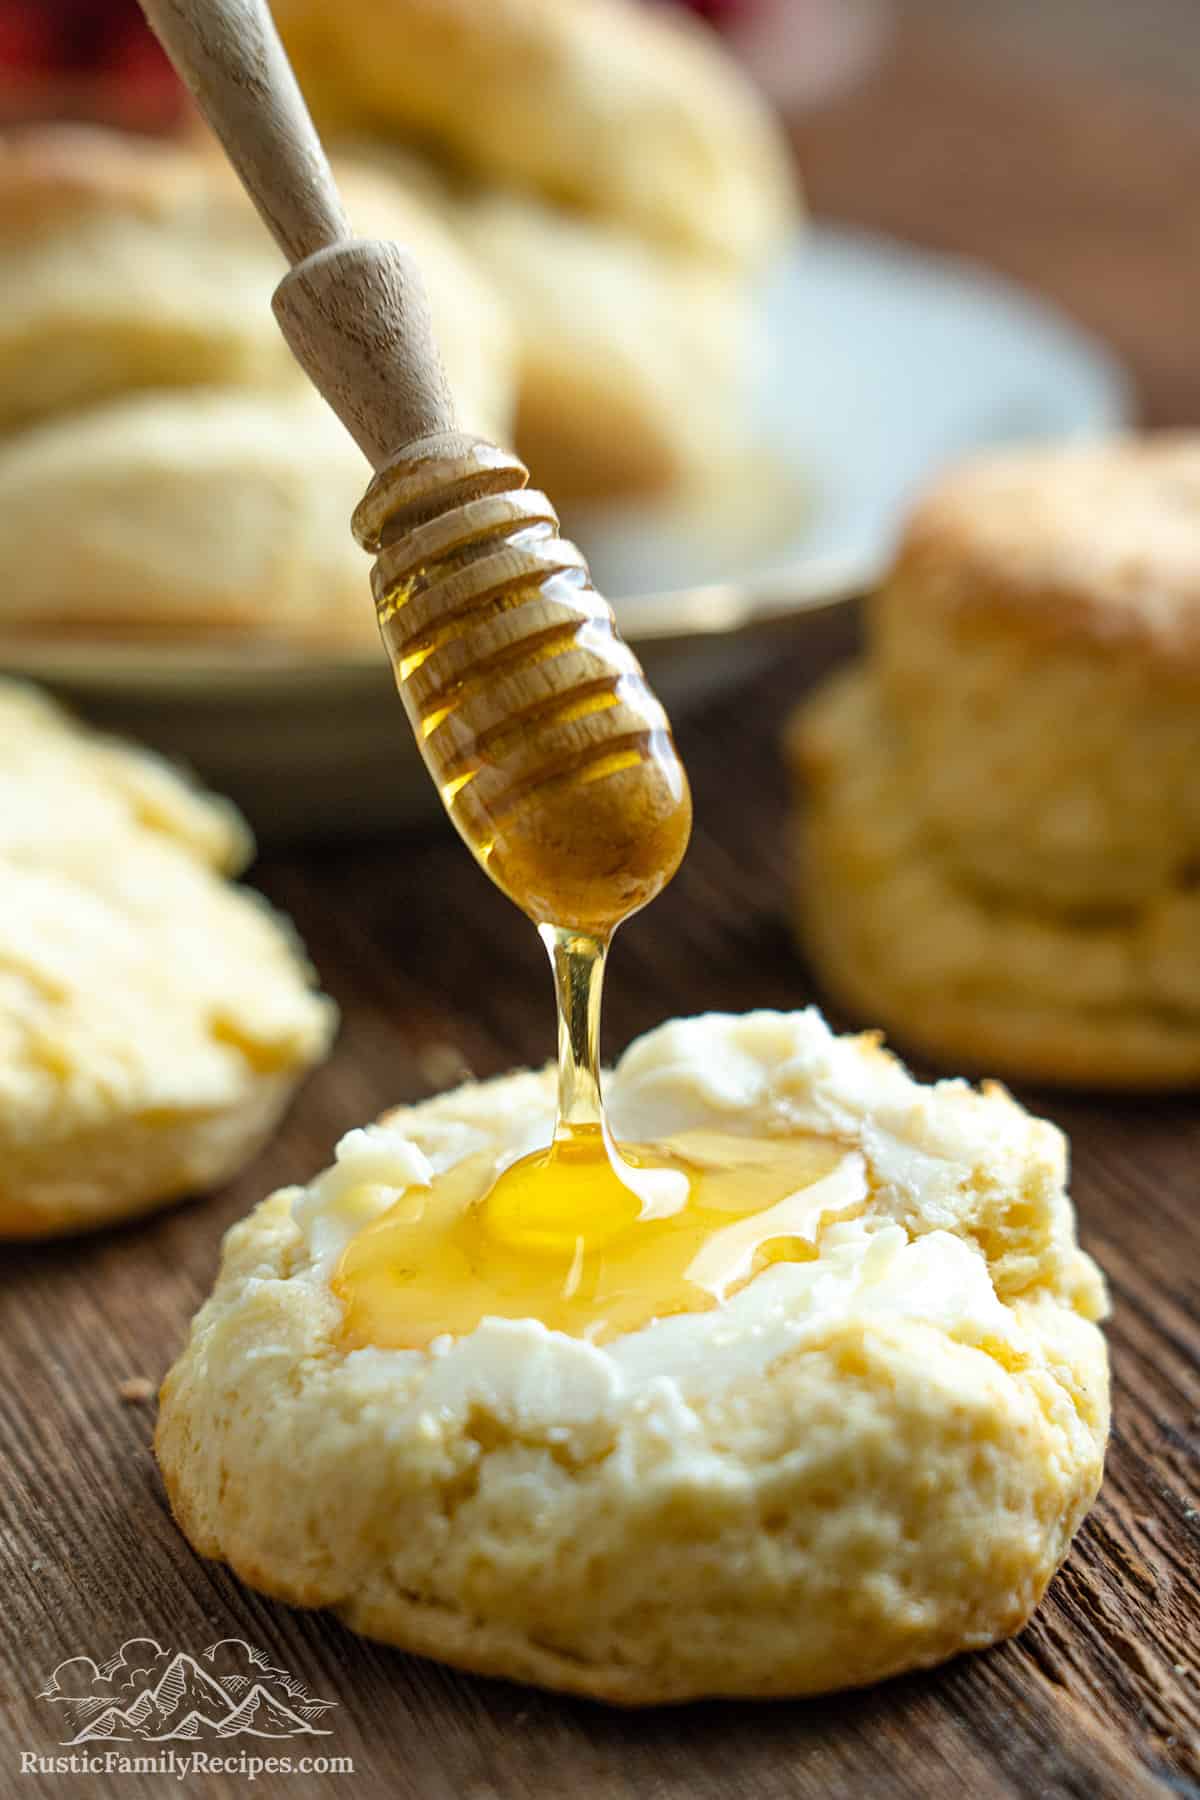 Drizzling honey on a buttermilk biscuit sliced in half